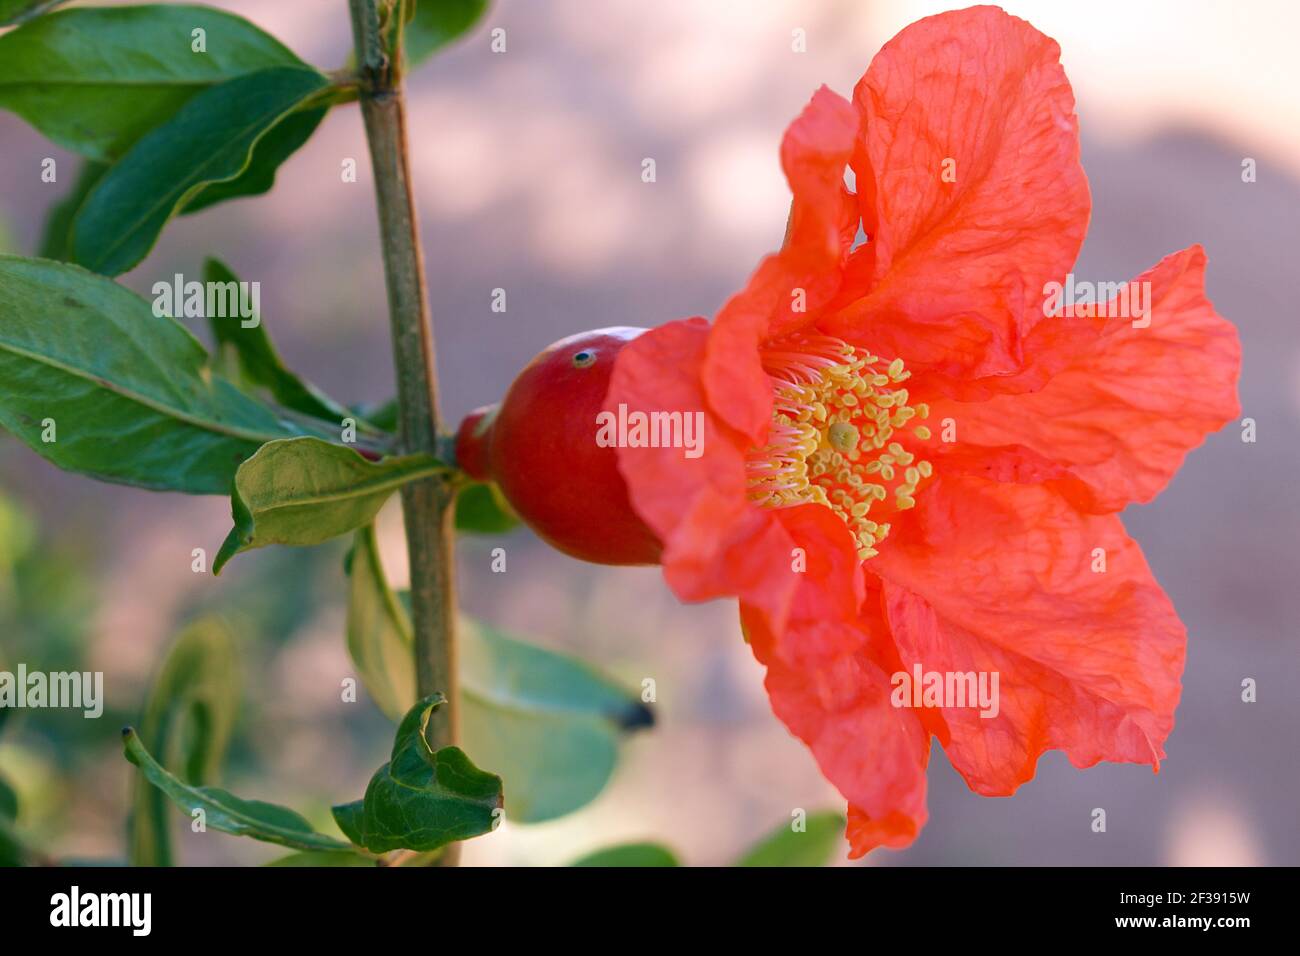 Bright red pomegranate flower  (Punica granatum). The floral features are variable and the flower could have three to seven petals. Stock Photo